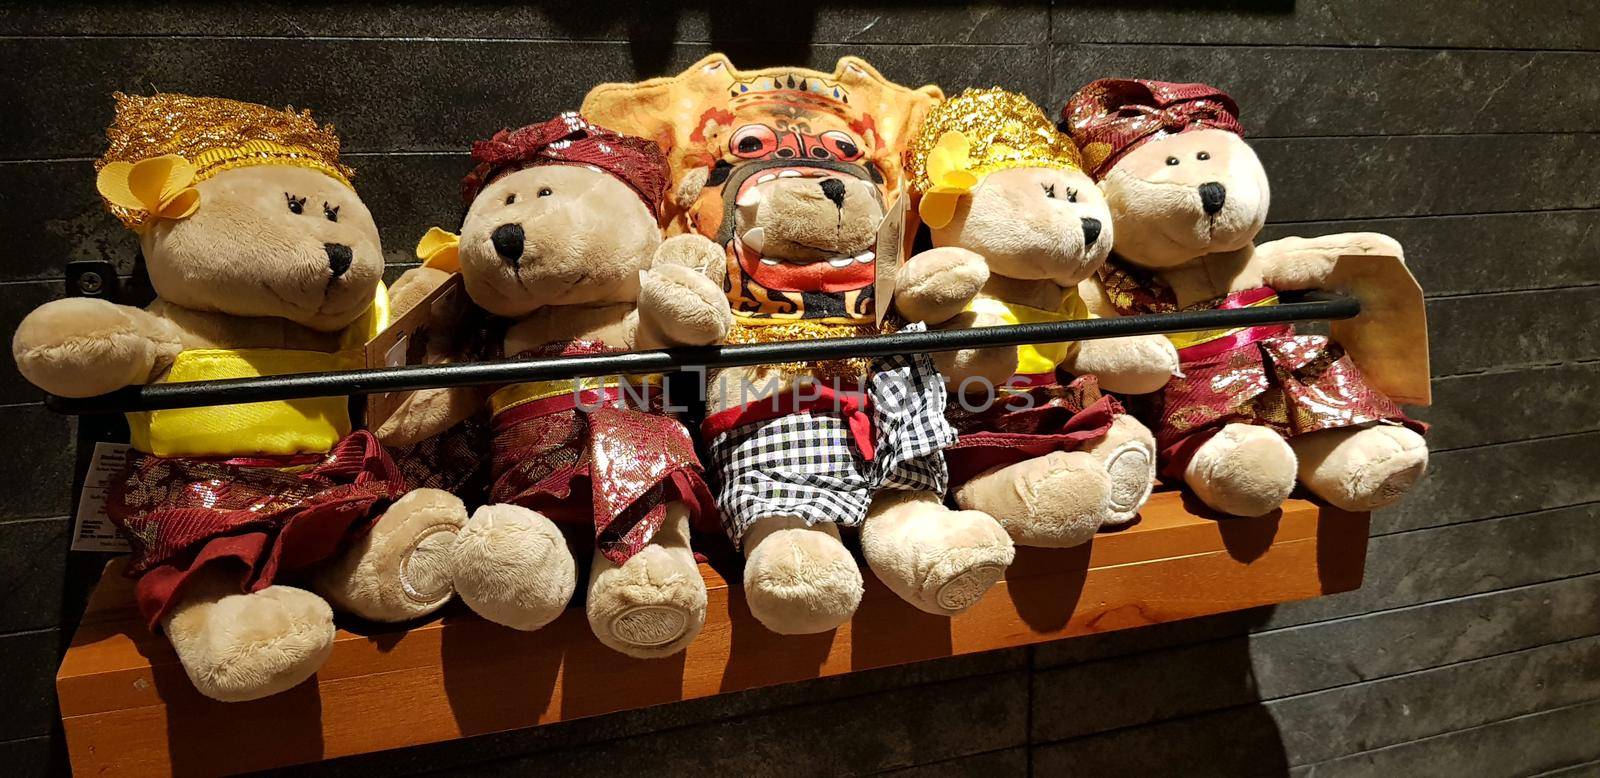 Group of Fluffy Stuffed Bear Toys Wearing various Clothes, teddy bear stuffed animal by antoksena